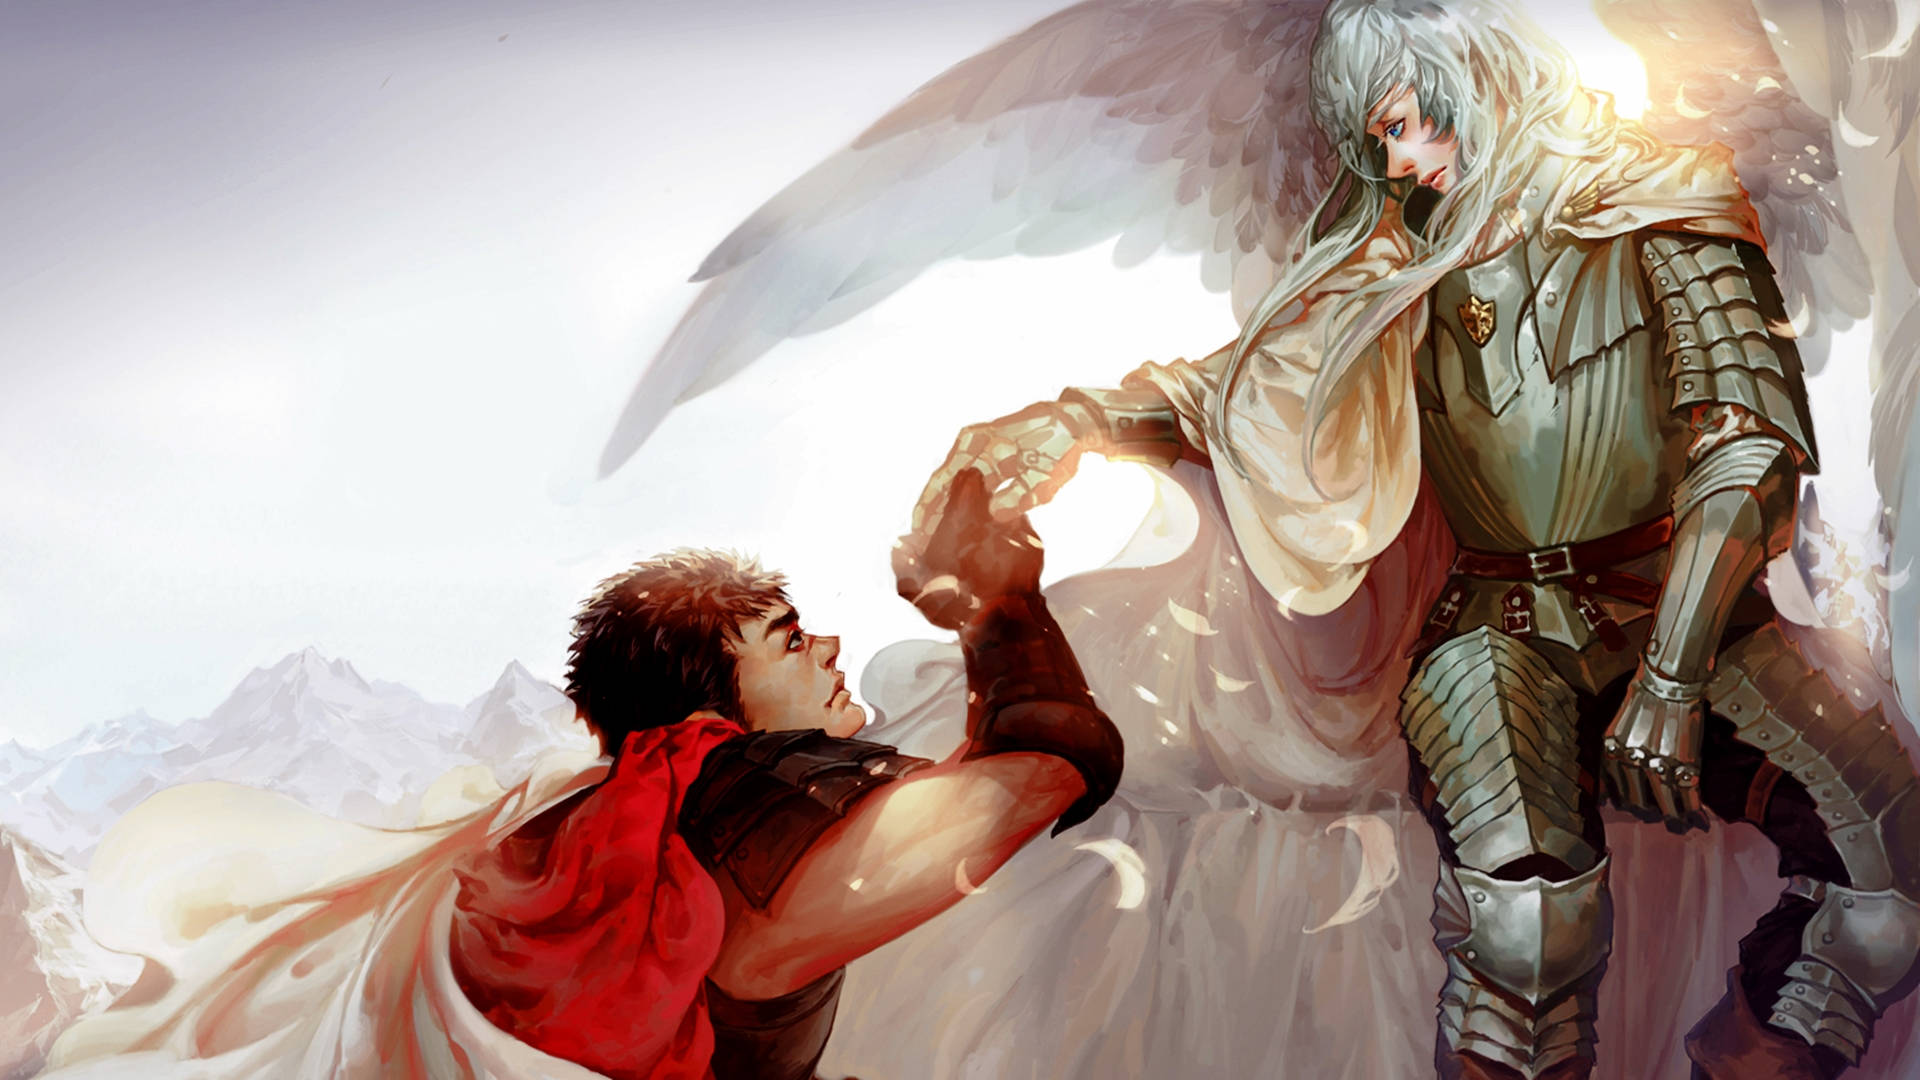 Berserk 4k Guts And Griffith Background